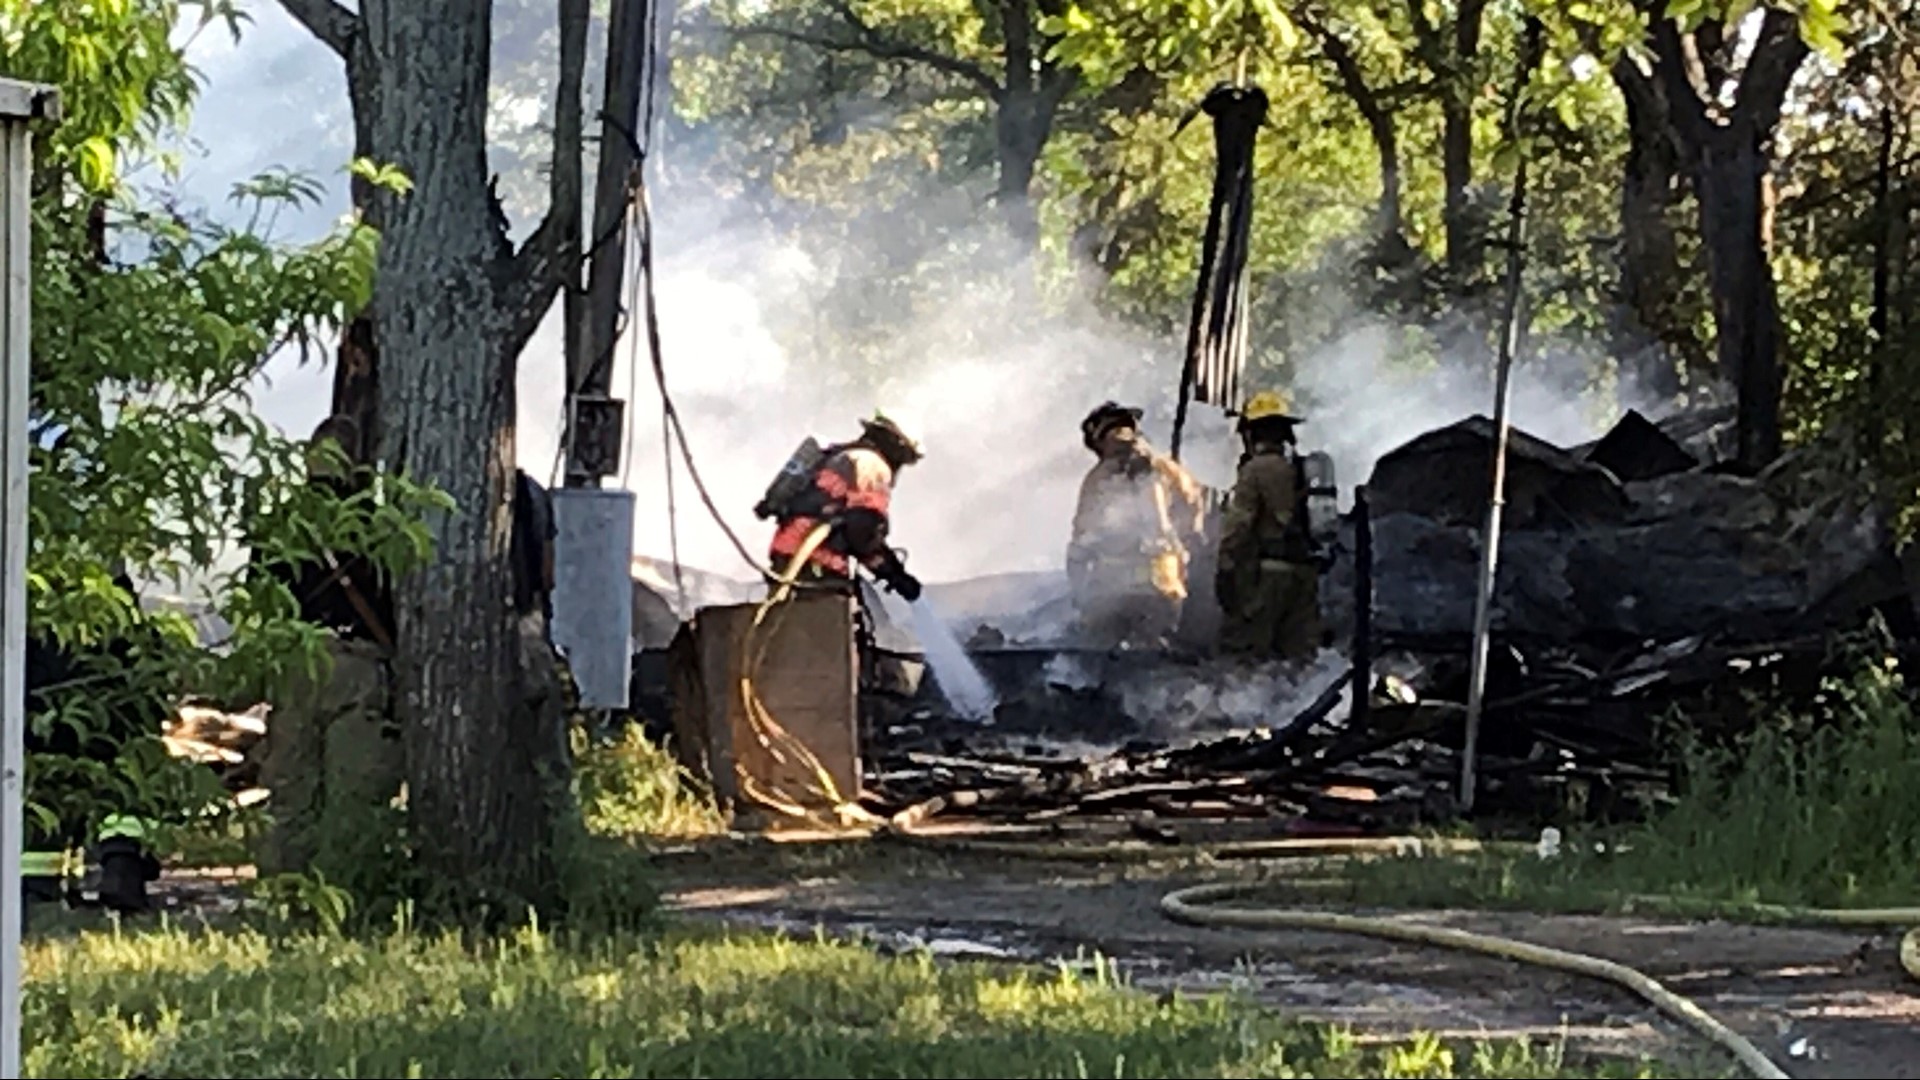 A Belton family was left with nowhere to go Good Friday after a devastating fire tore through their home.